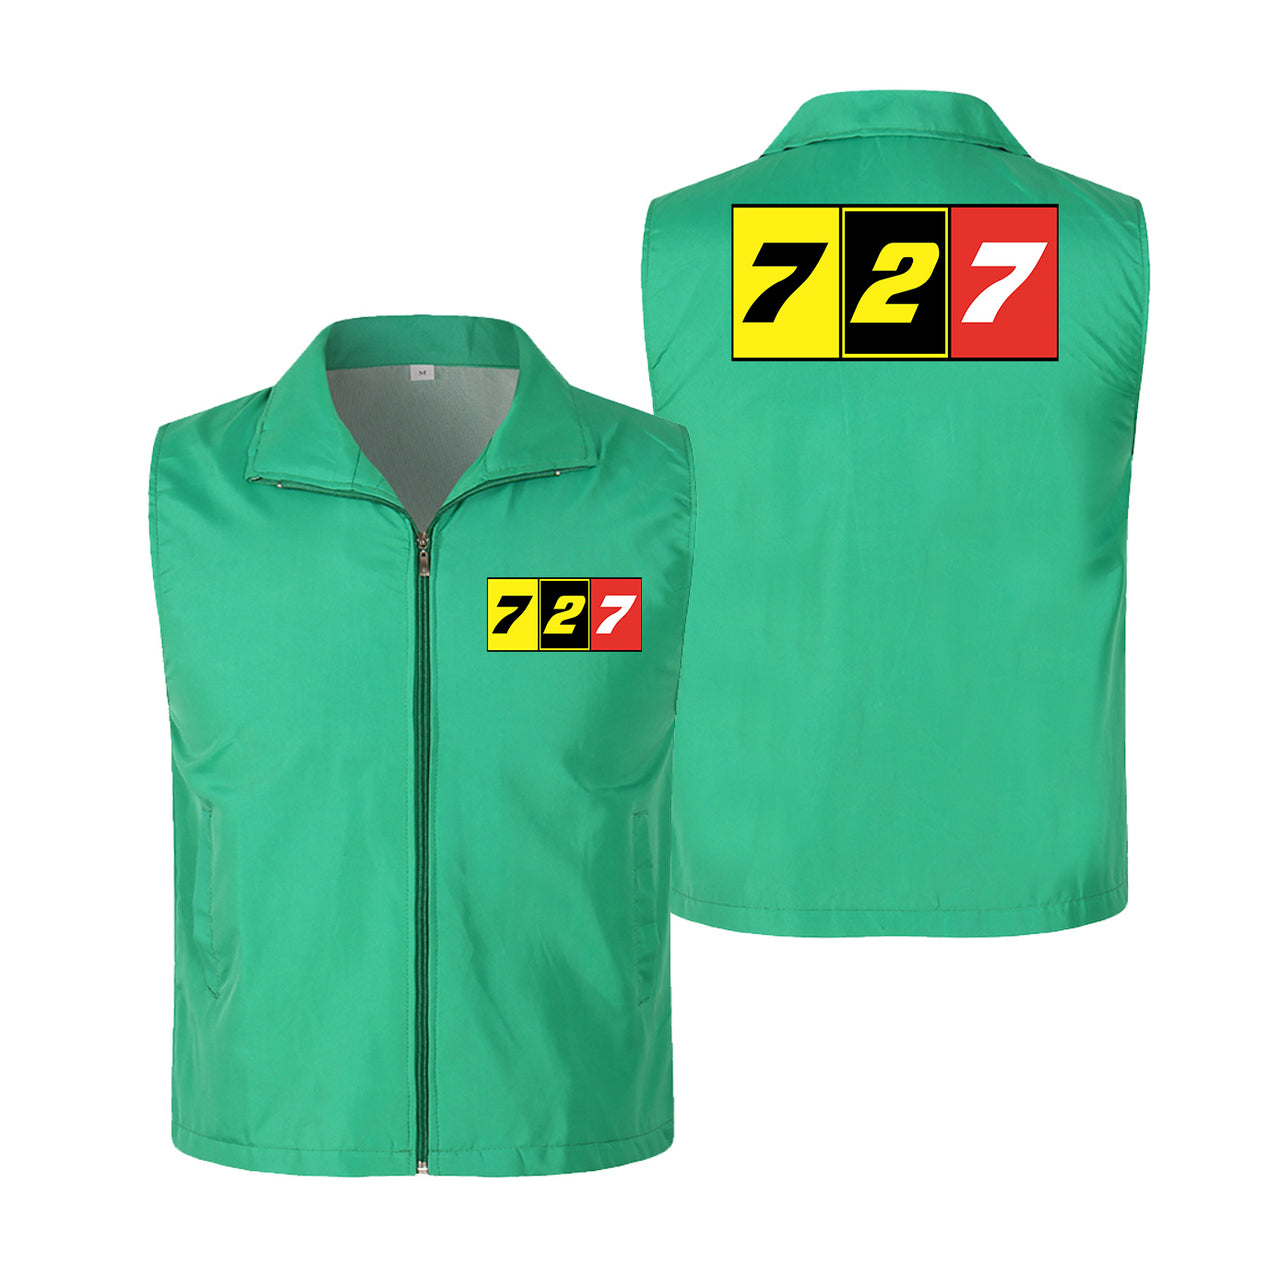 Flat Colourful 727 Designed Thin Style Vests